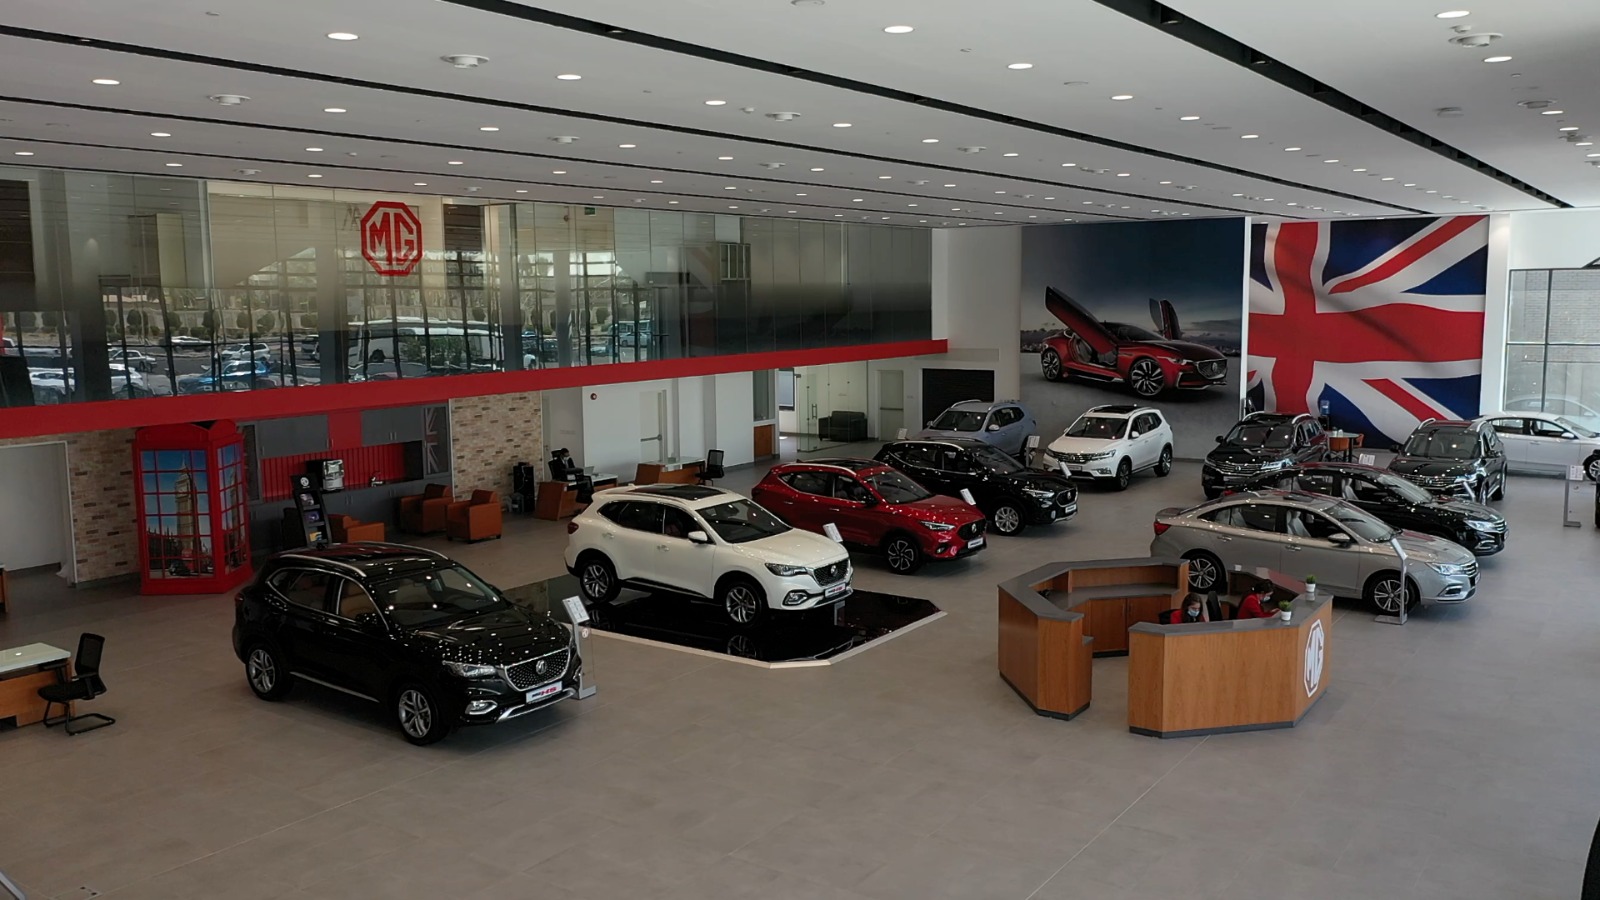 The New MG Flagship Showroom in Kuwait and the largest in GCC